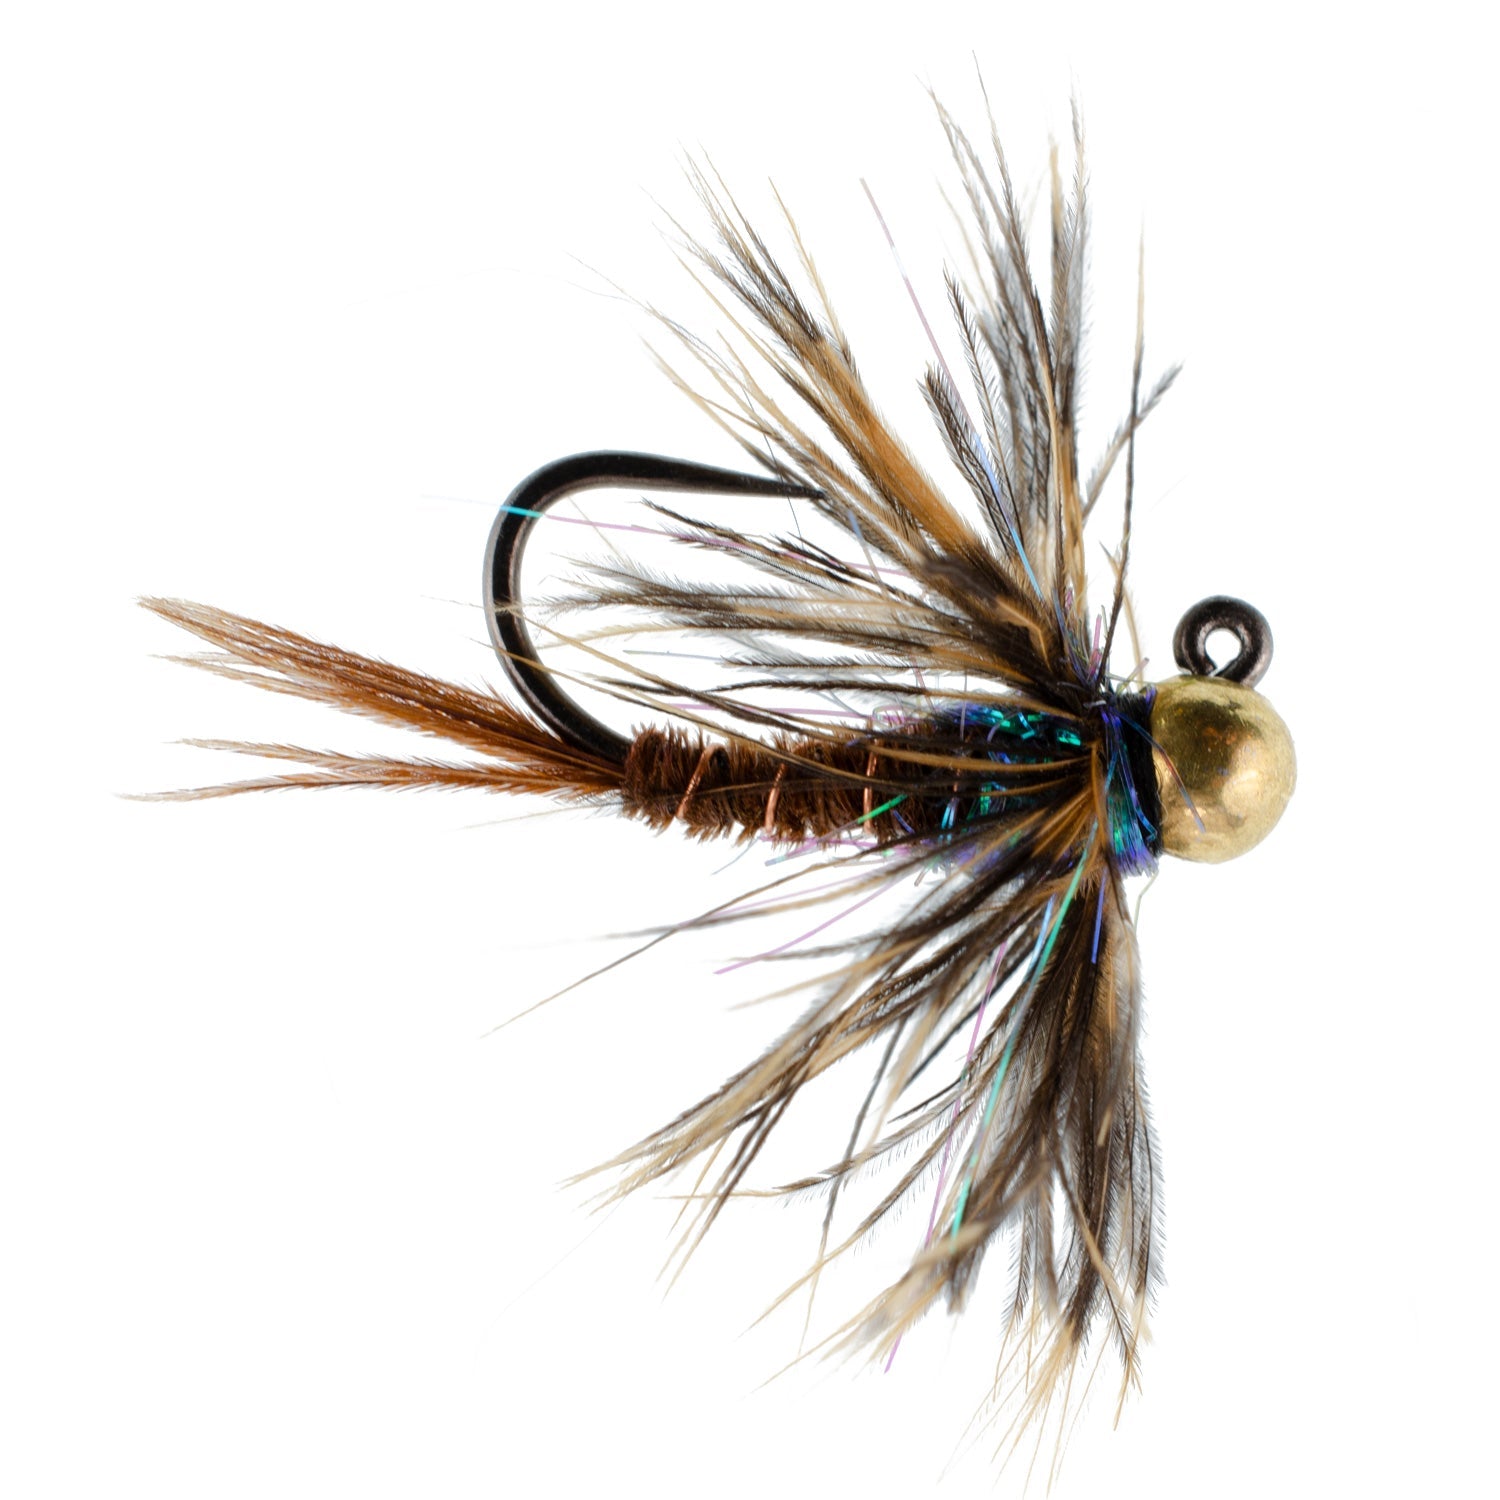 Tungsten Bead Soft Hackle Pheasant Tail Tactical Jig Czech Nymph Euro Nymphing Fly - 6 Flies Size 12